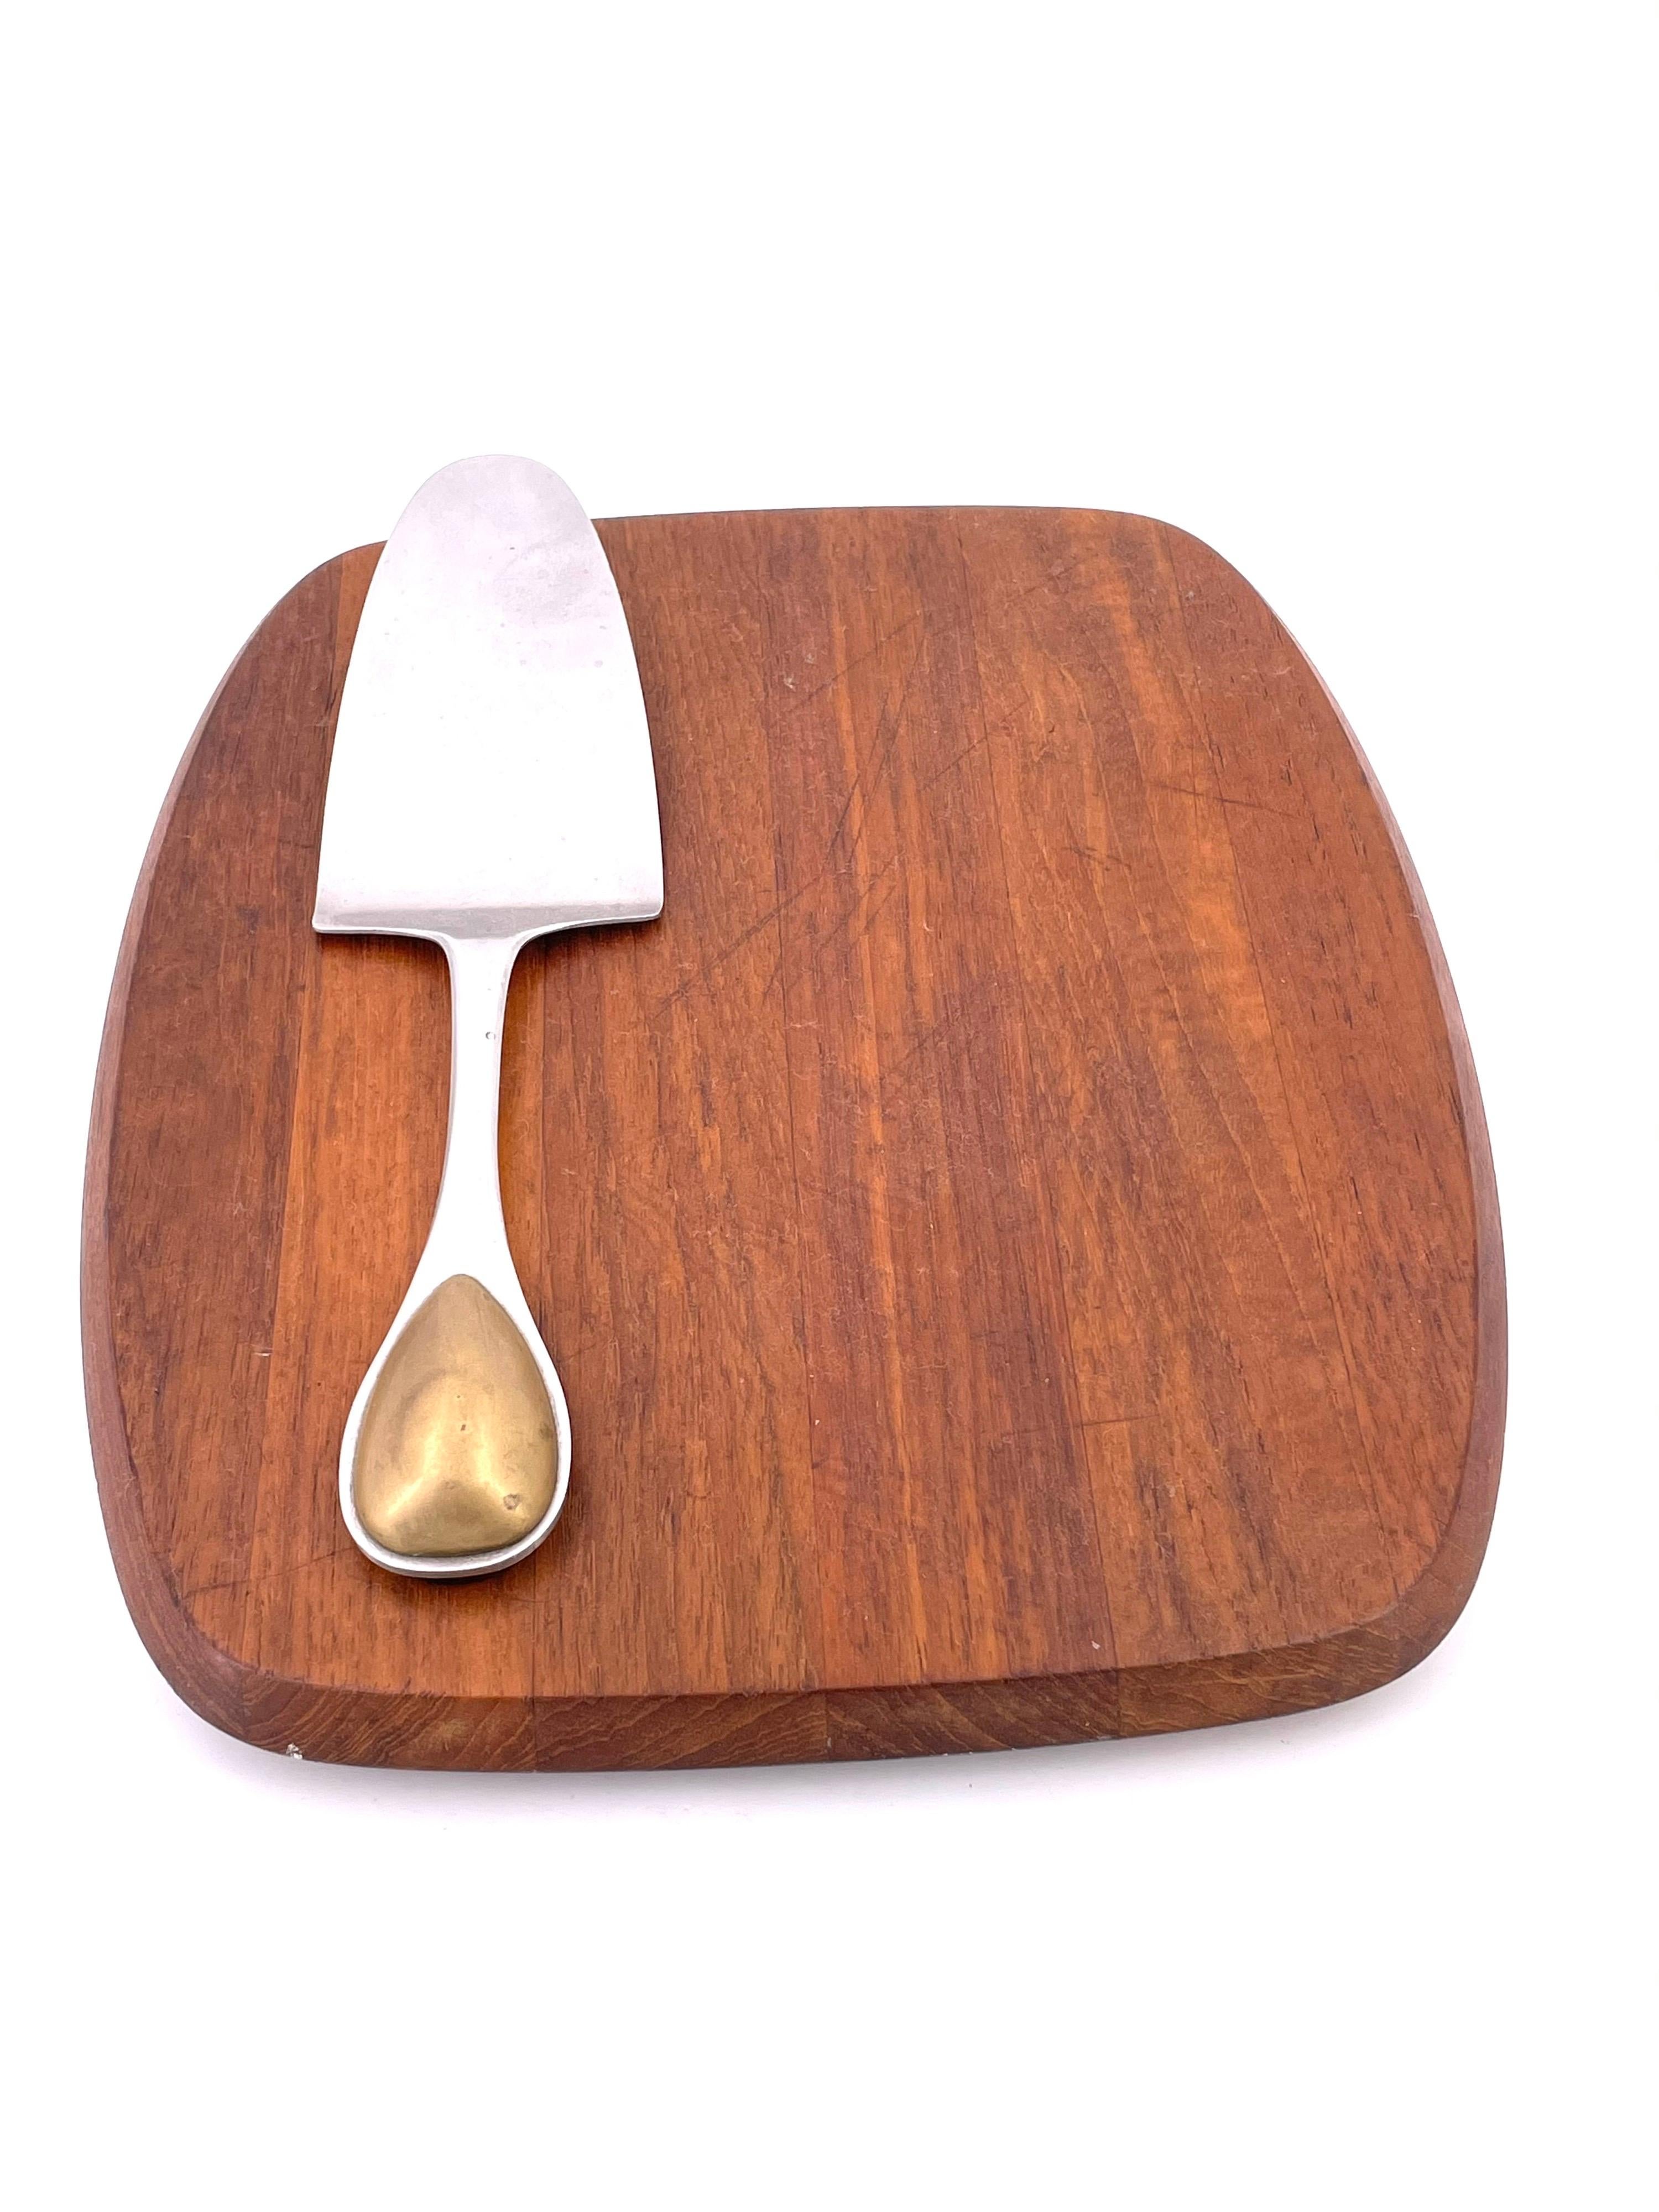 A pristine solid teak cheese board with the cutter designed by Vivianna Torun for Dansk, circa 1960s. The piece is in great condition with what appears to be minimal use and has been cleaned and oiled. #1160.